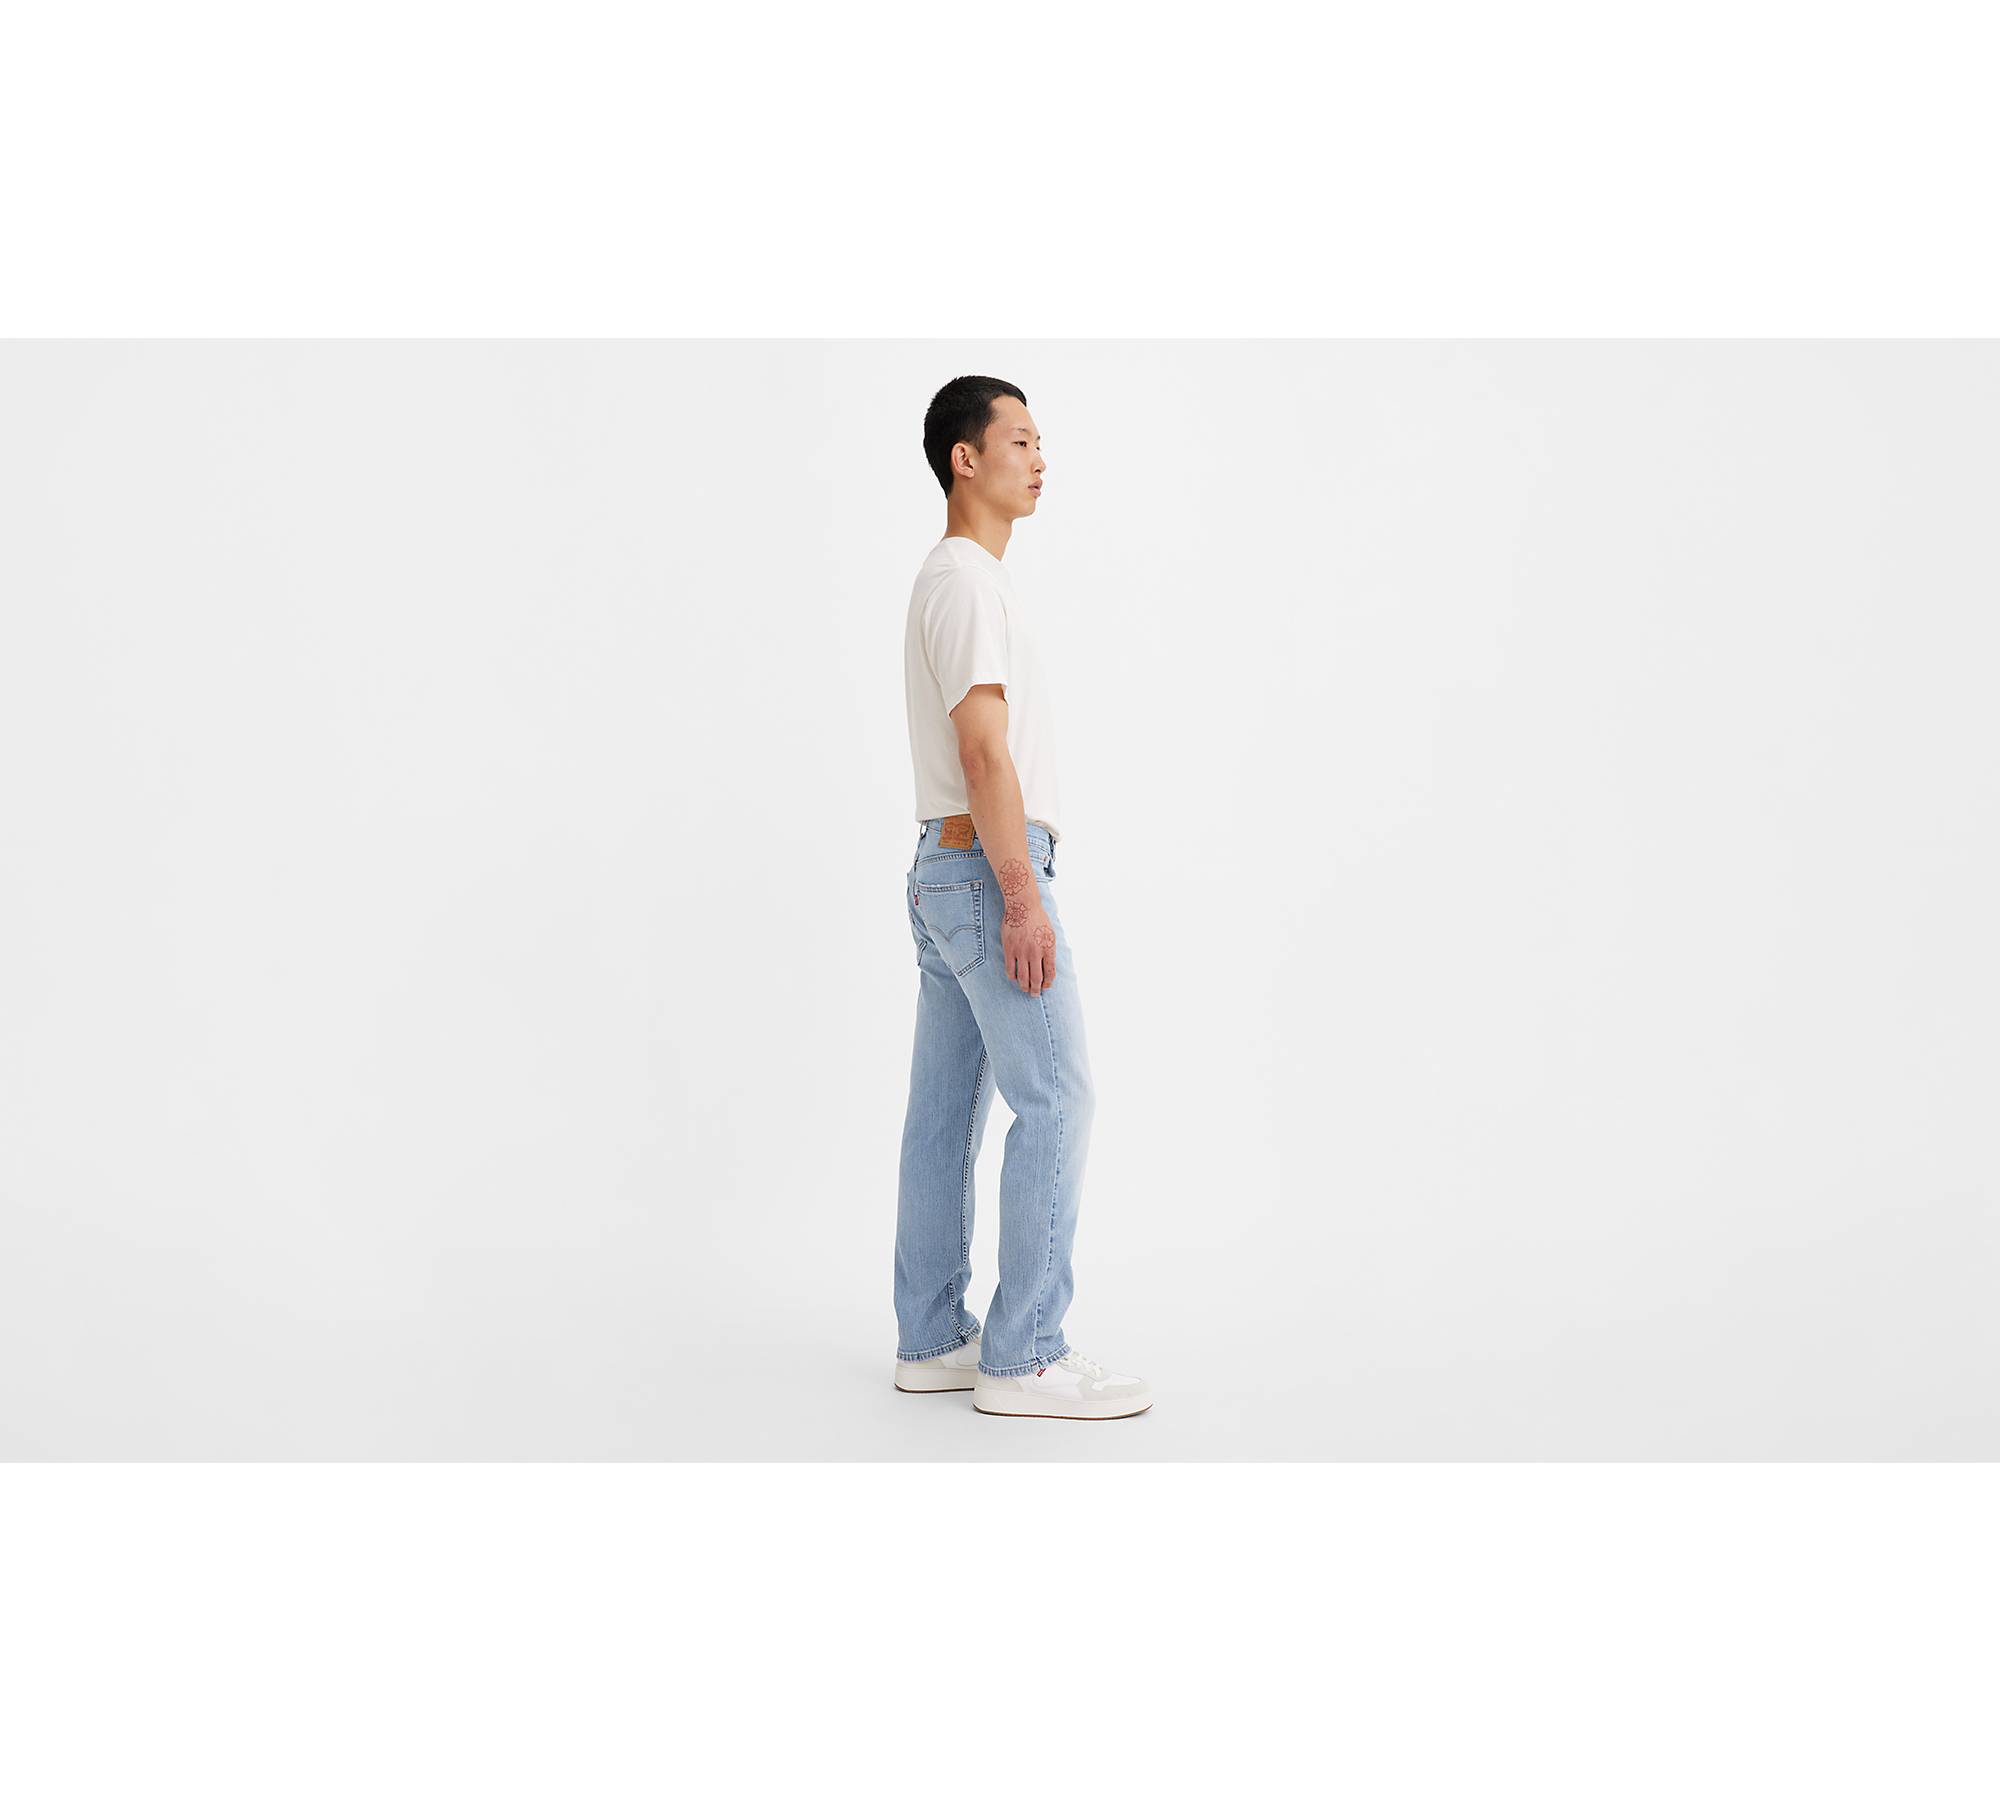 559™ Relaxed Straight Fit Men's Jeans - Light Wash | Levi's® US